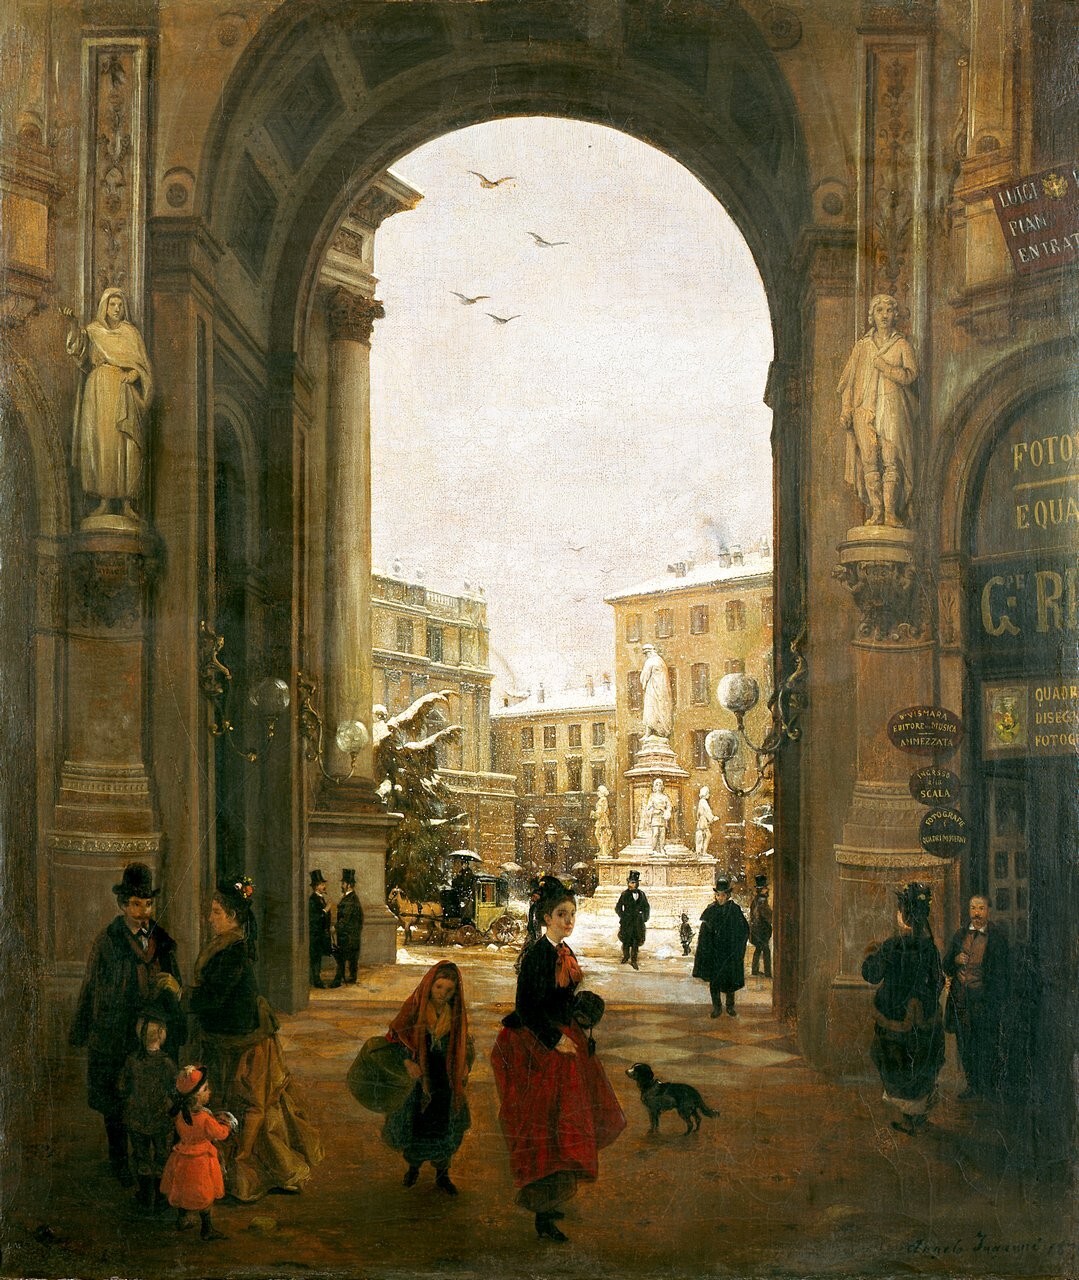 Milan, Piazza della Scala under the snow, seen from the Gallery